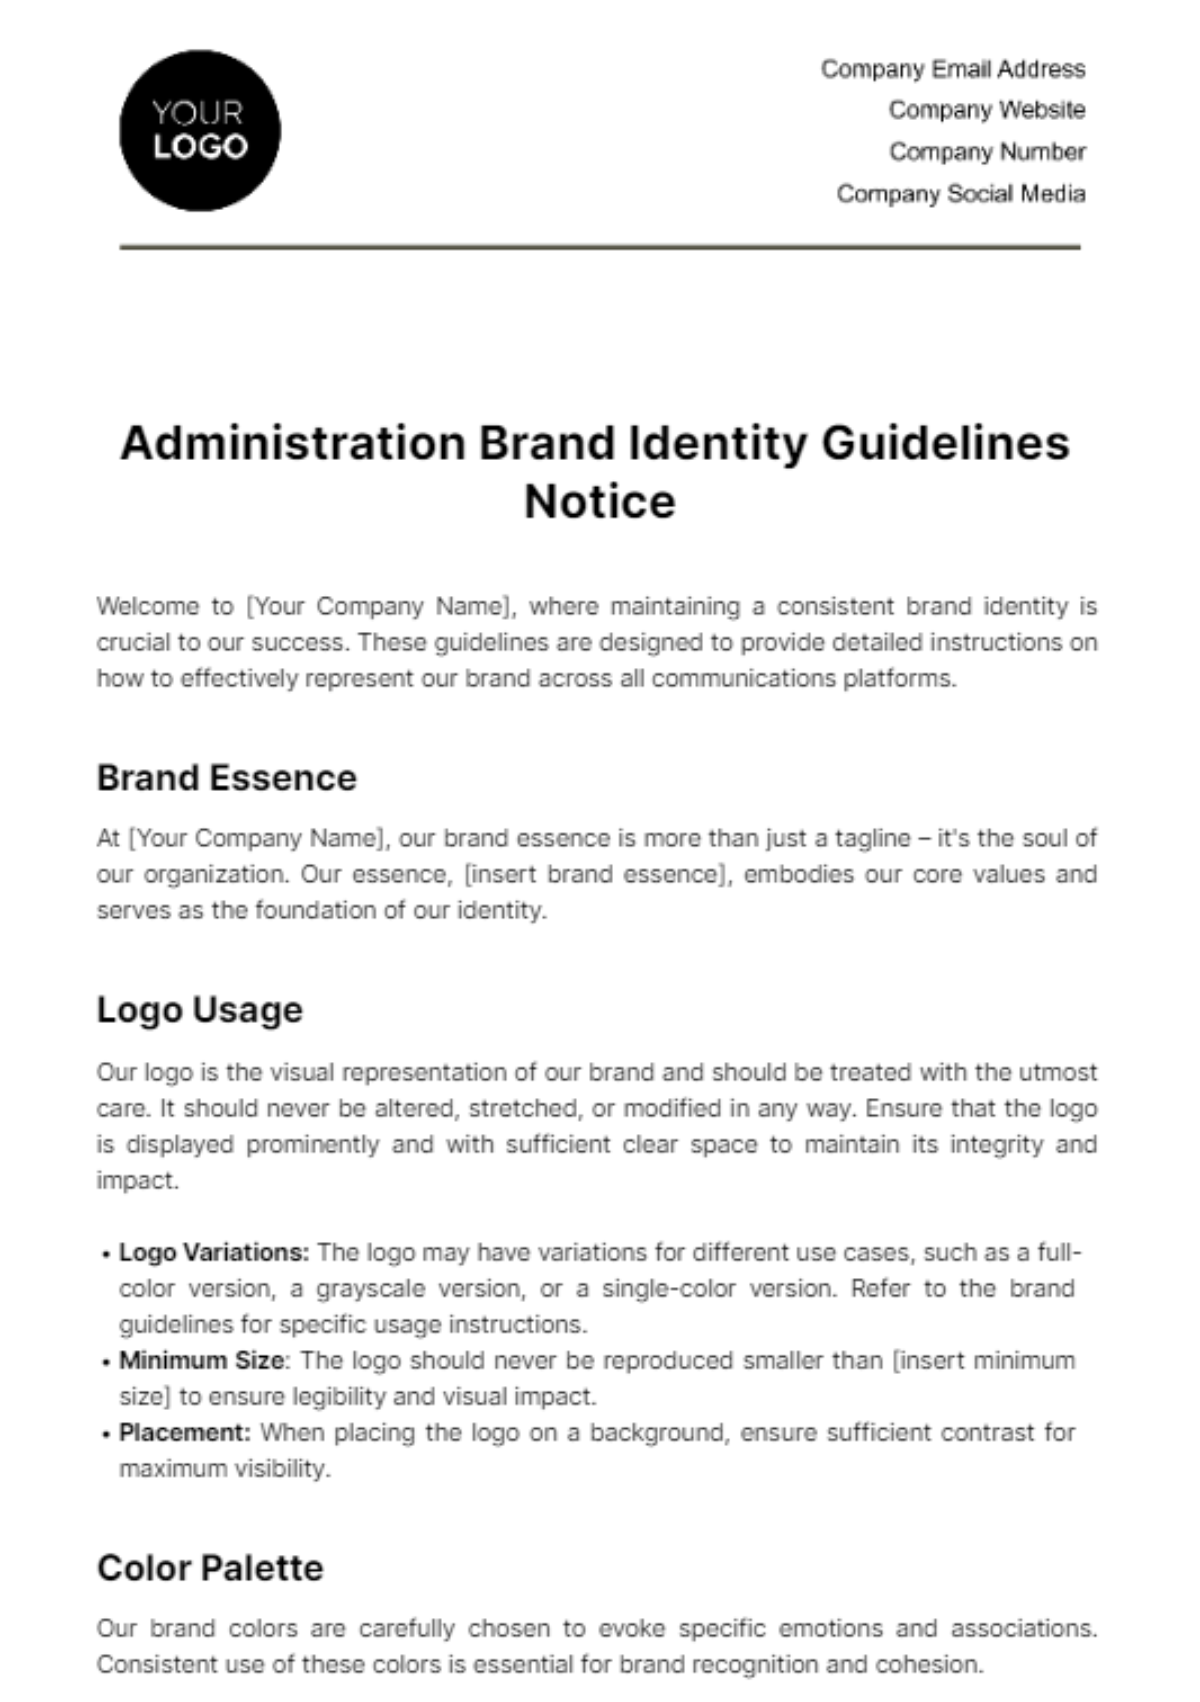 Free Administration Brand Identity Guidelines Notice Template